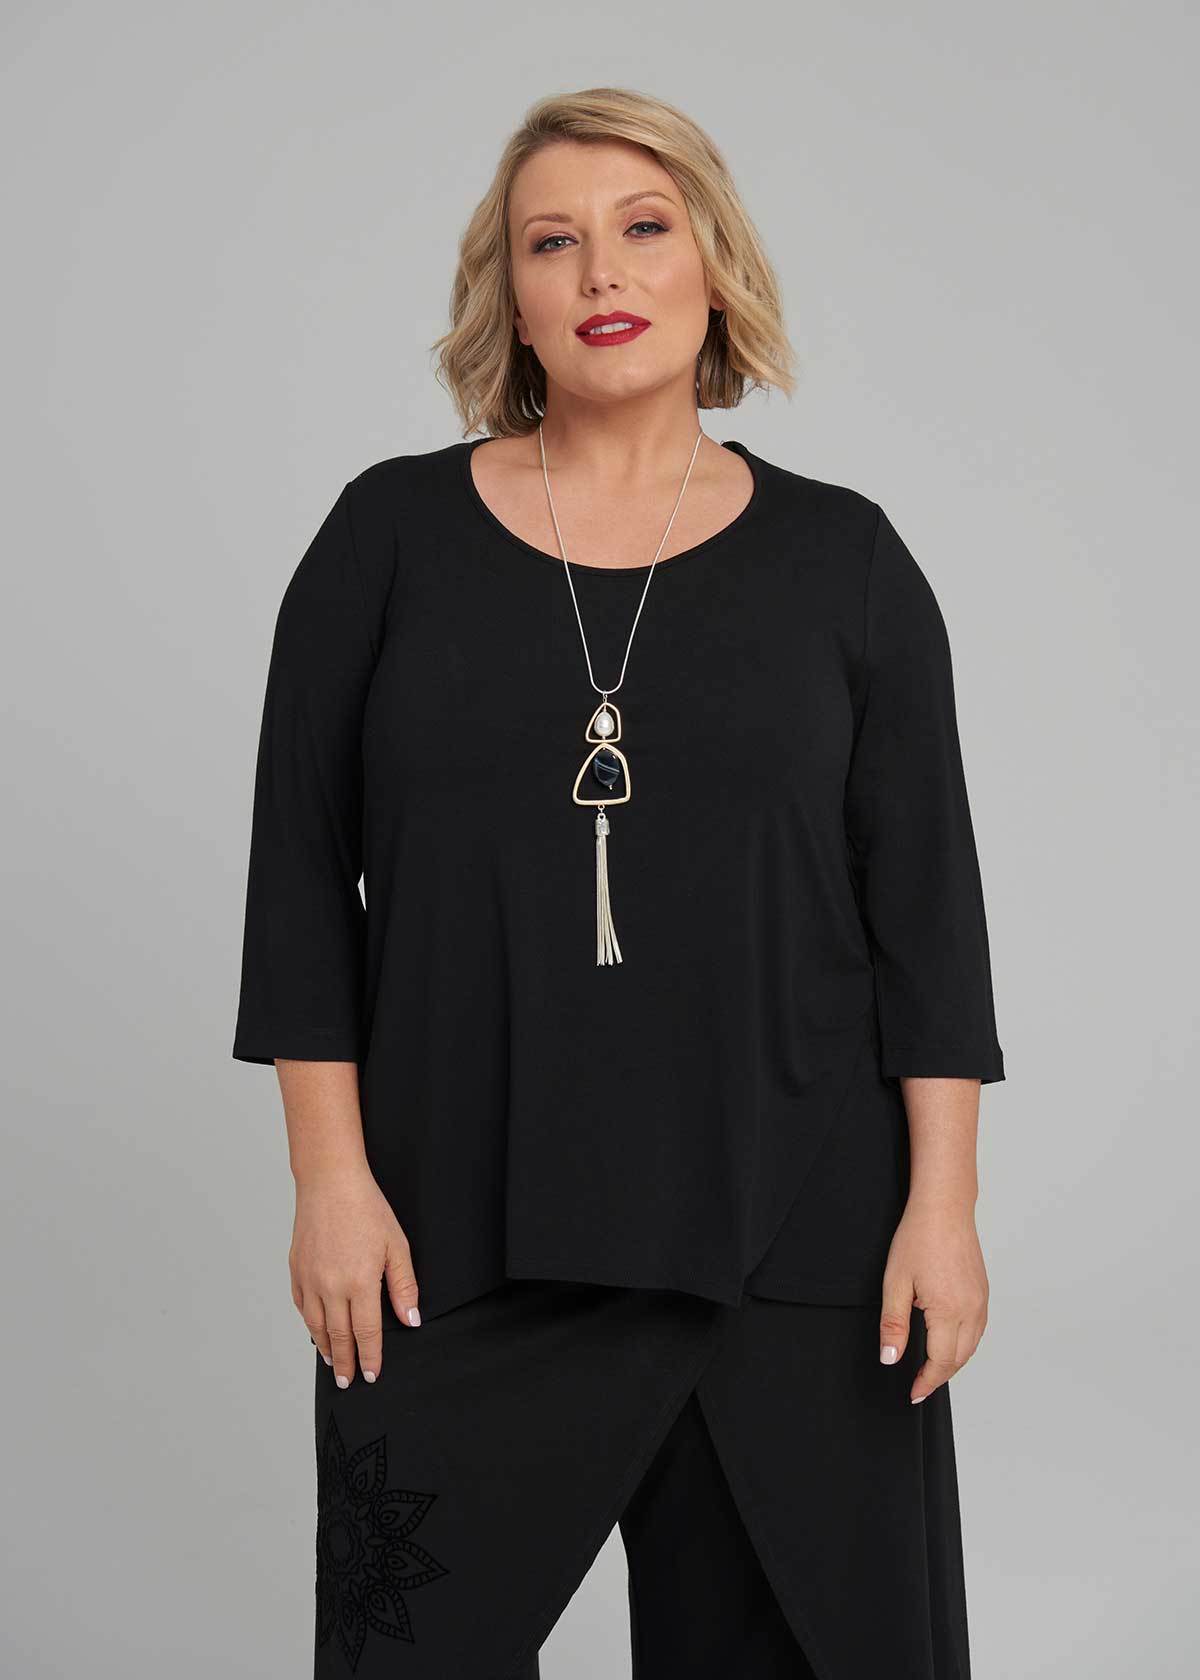 Shop Petite Everyday 3/4 Sleeve Top in Black in sizes 12 to 30 | Taking ...